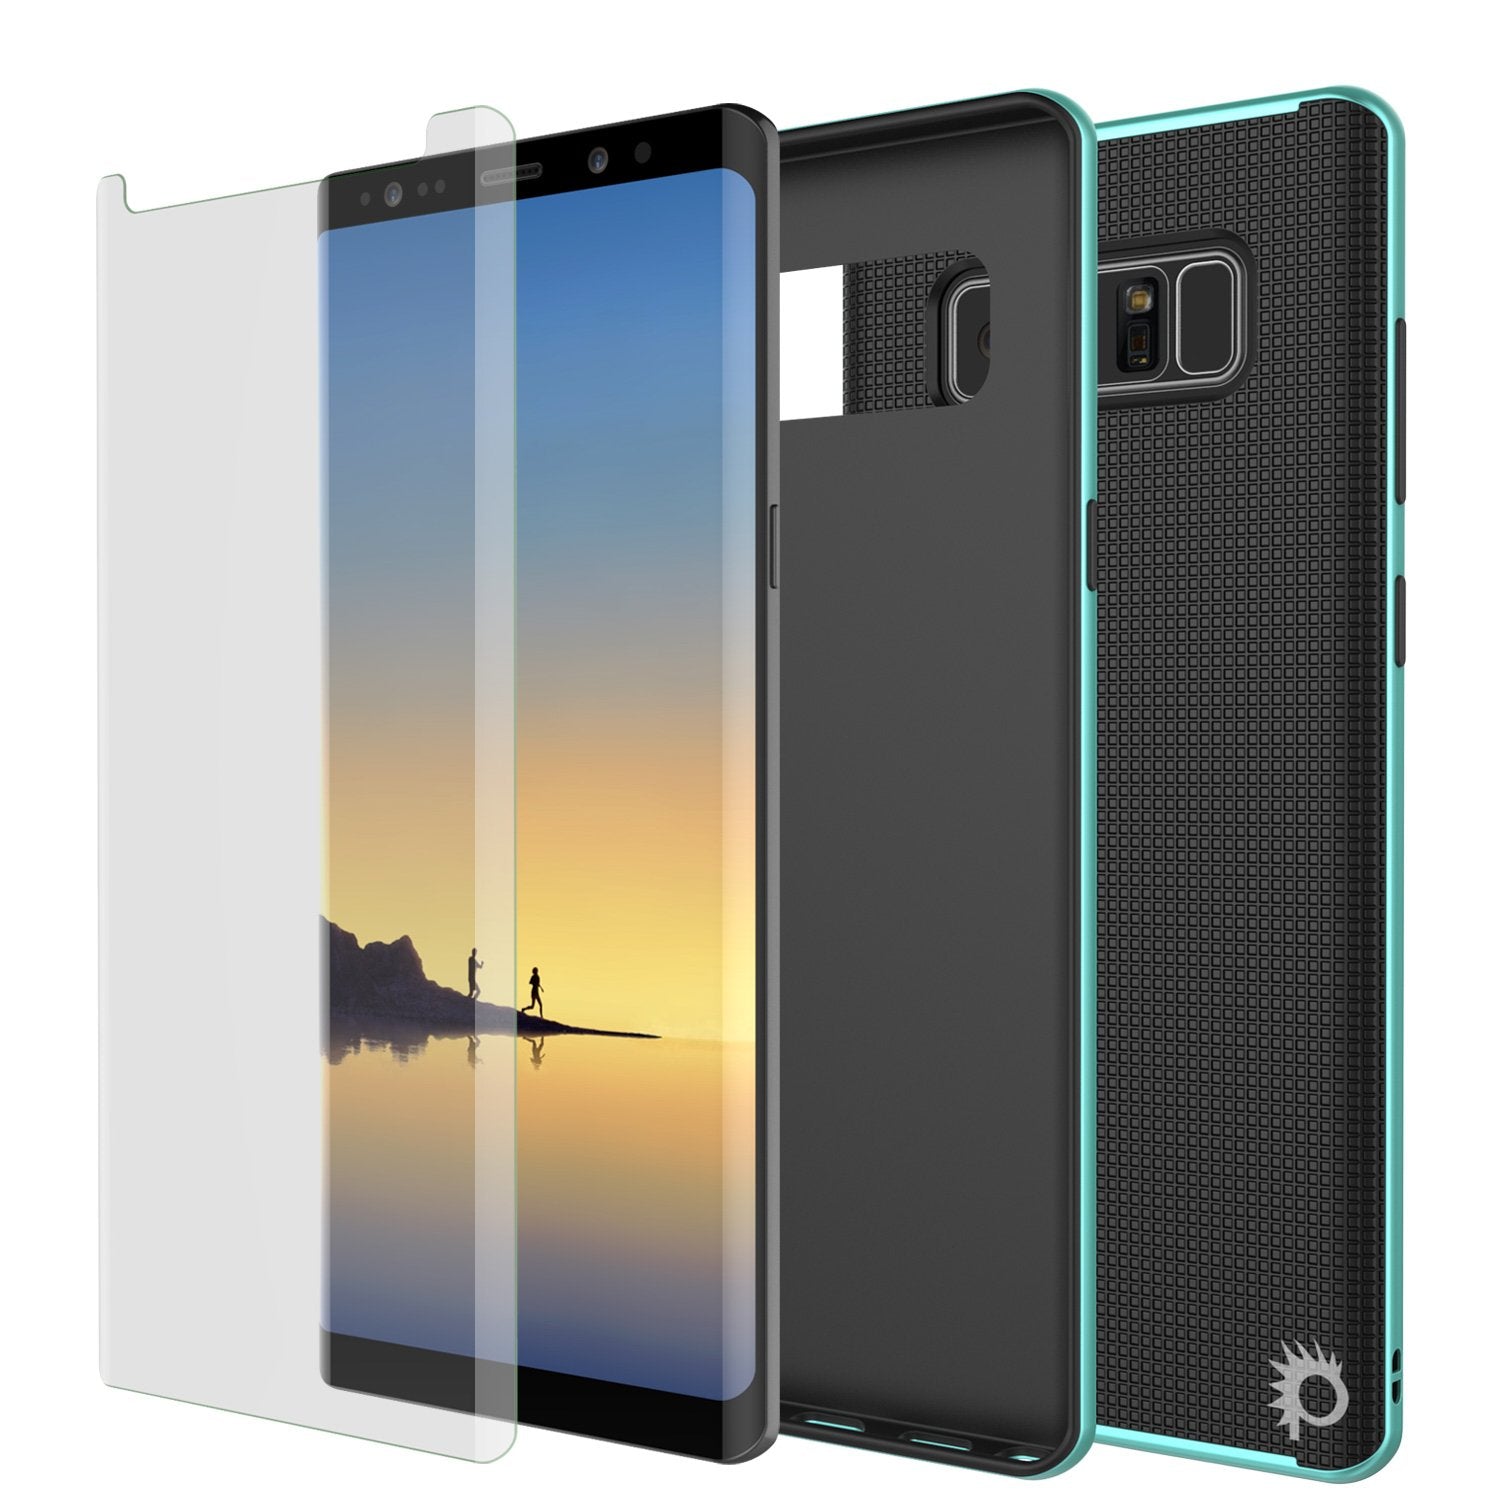 Galaxy Note 8 Case, PunkCase Stealth Teal Series Hybrid 3-Piece Shockproof Dual Layer Cover